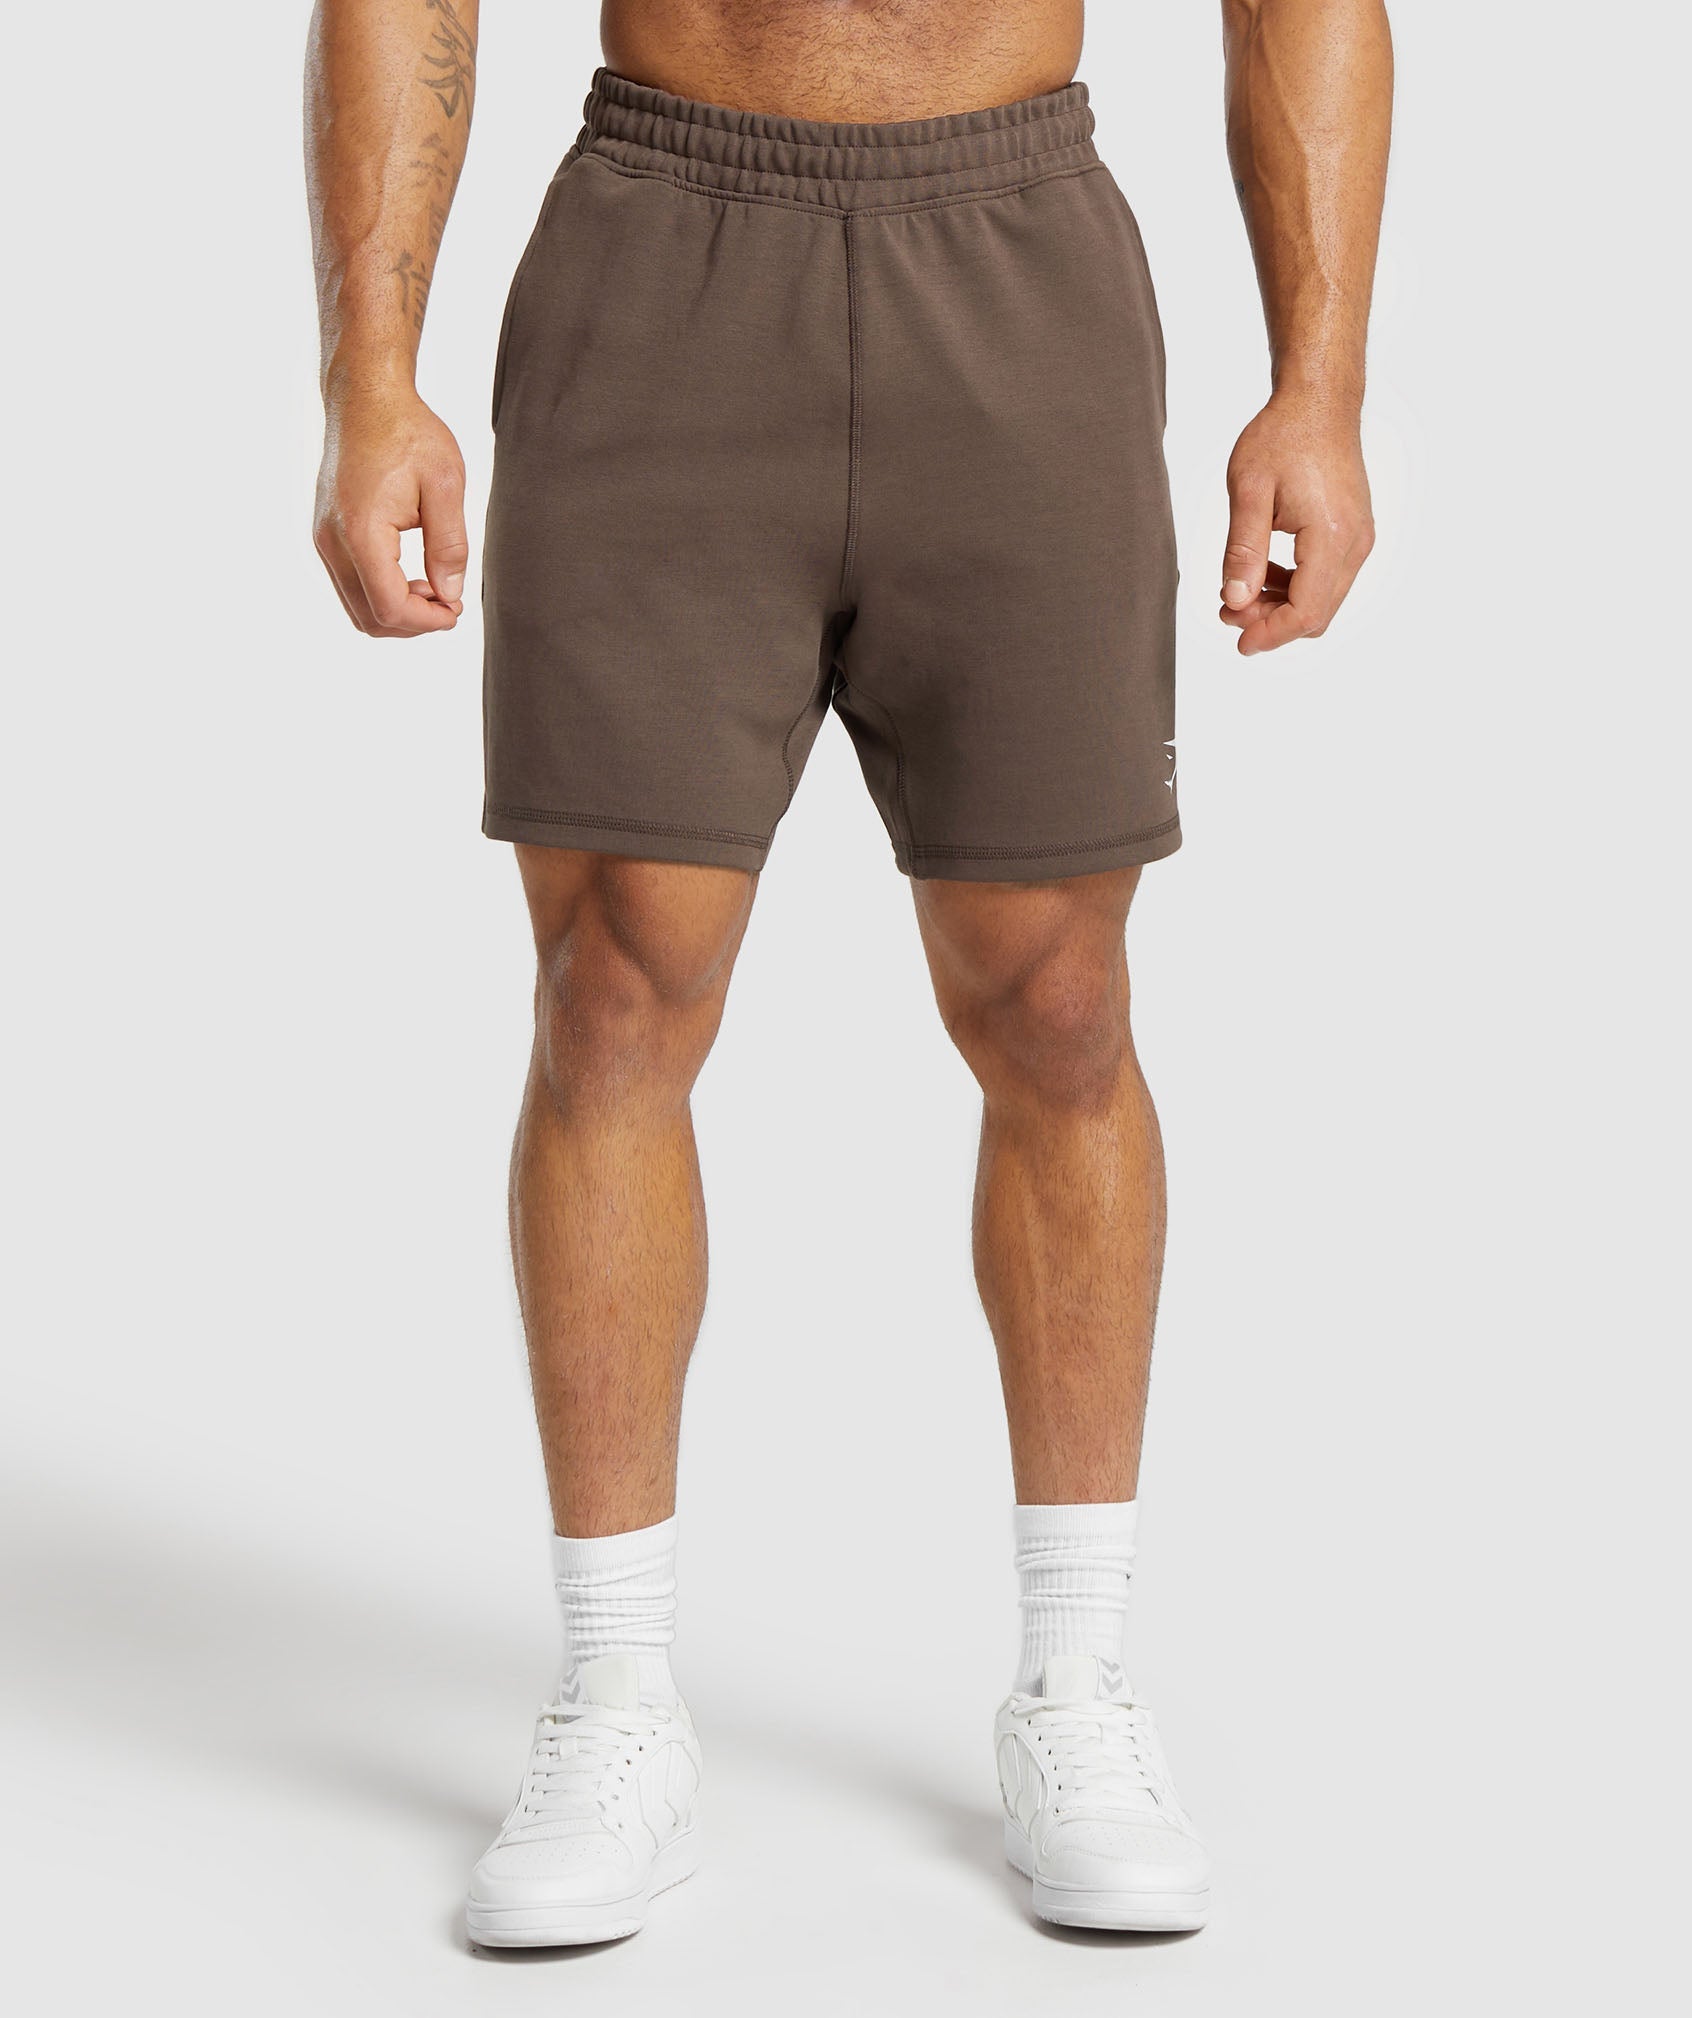 Impact Shorts in Walnut Brown - view 2